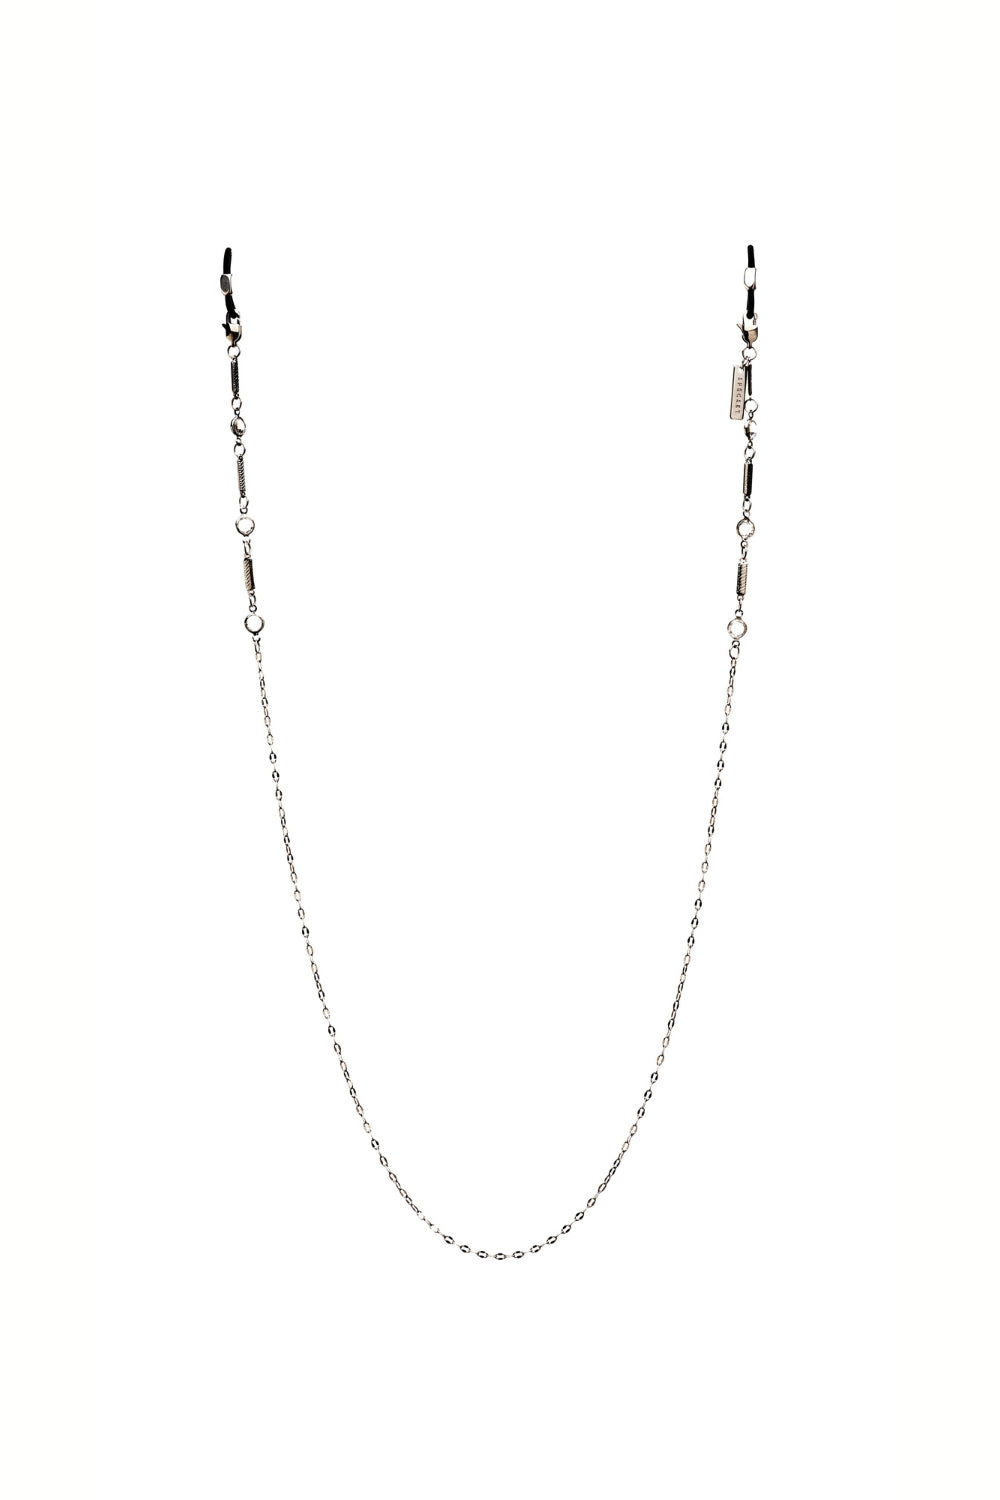 BLING THING - Dainty Eyewear Chain with Zircon Crystals - Silver | SPECSET